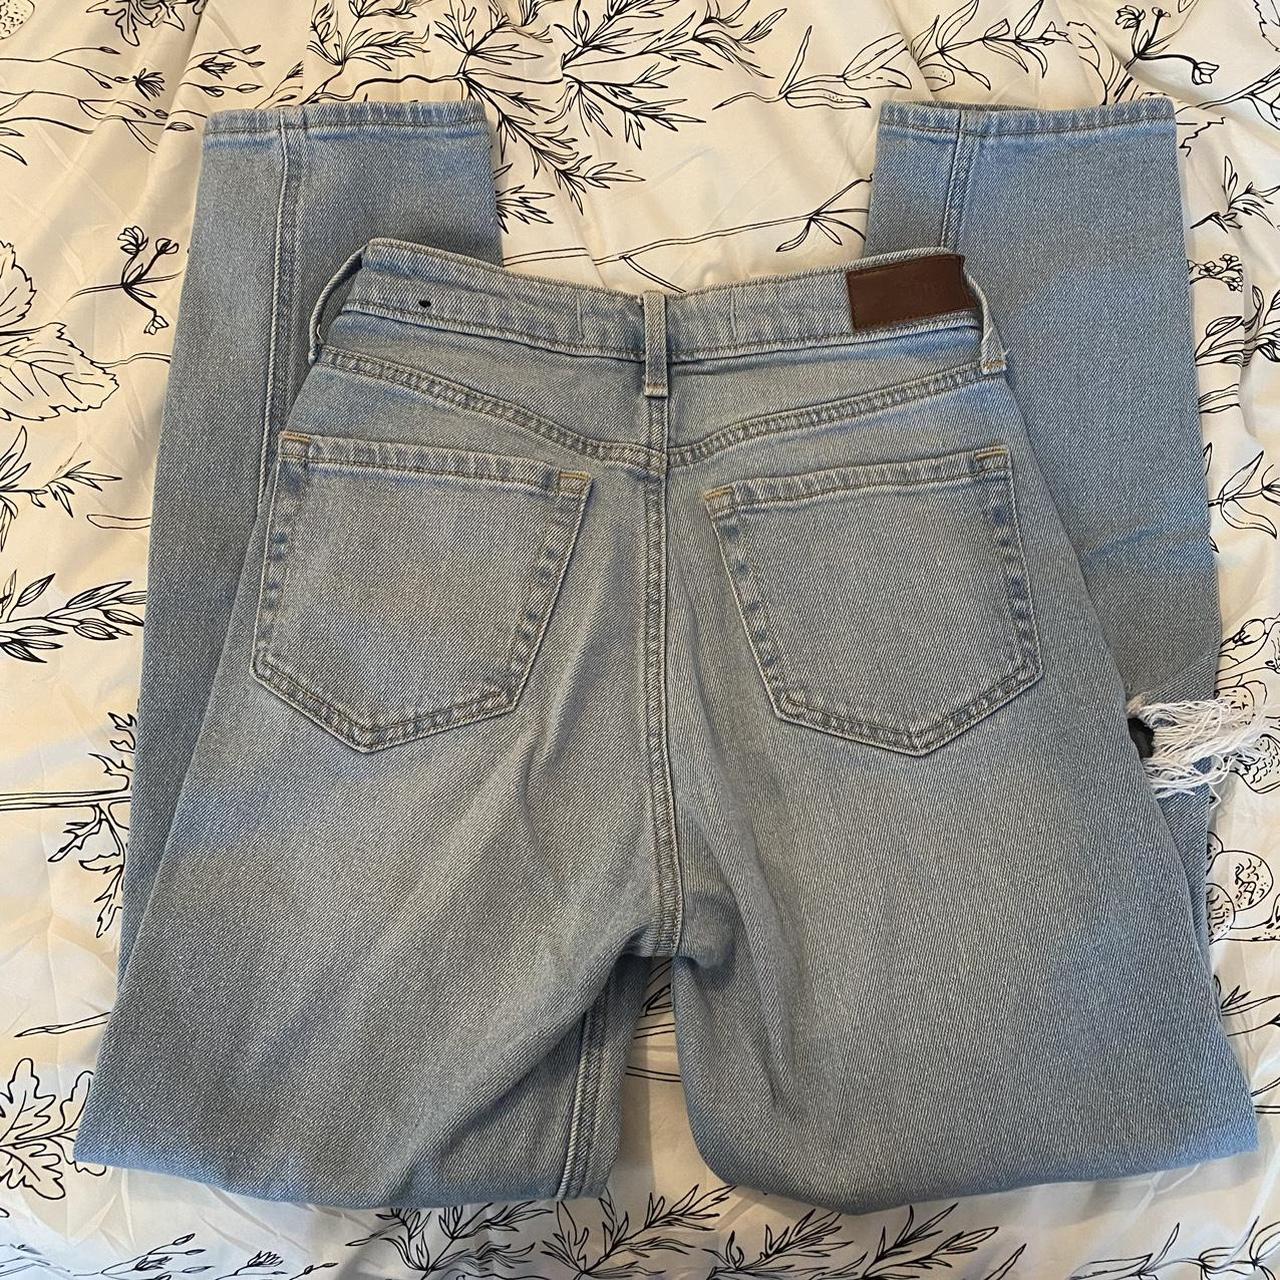 Hollister ultra high rise mom jeans, woman's size 23W/27L paper bag style  waist